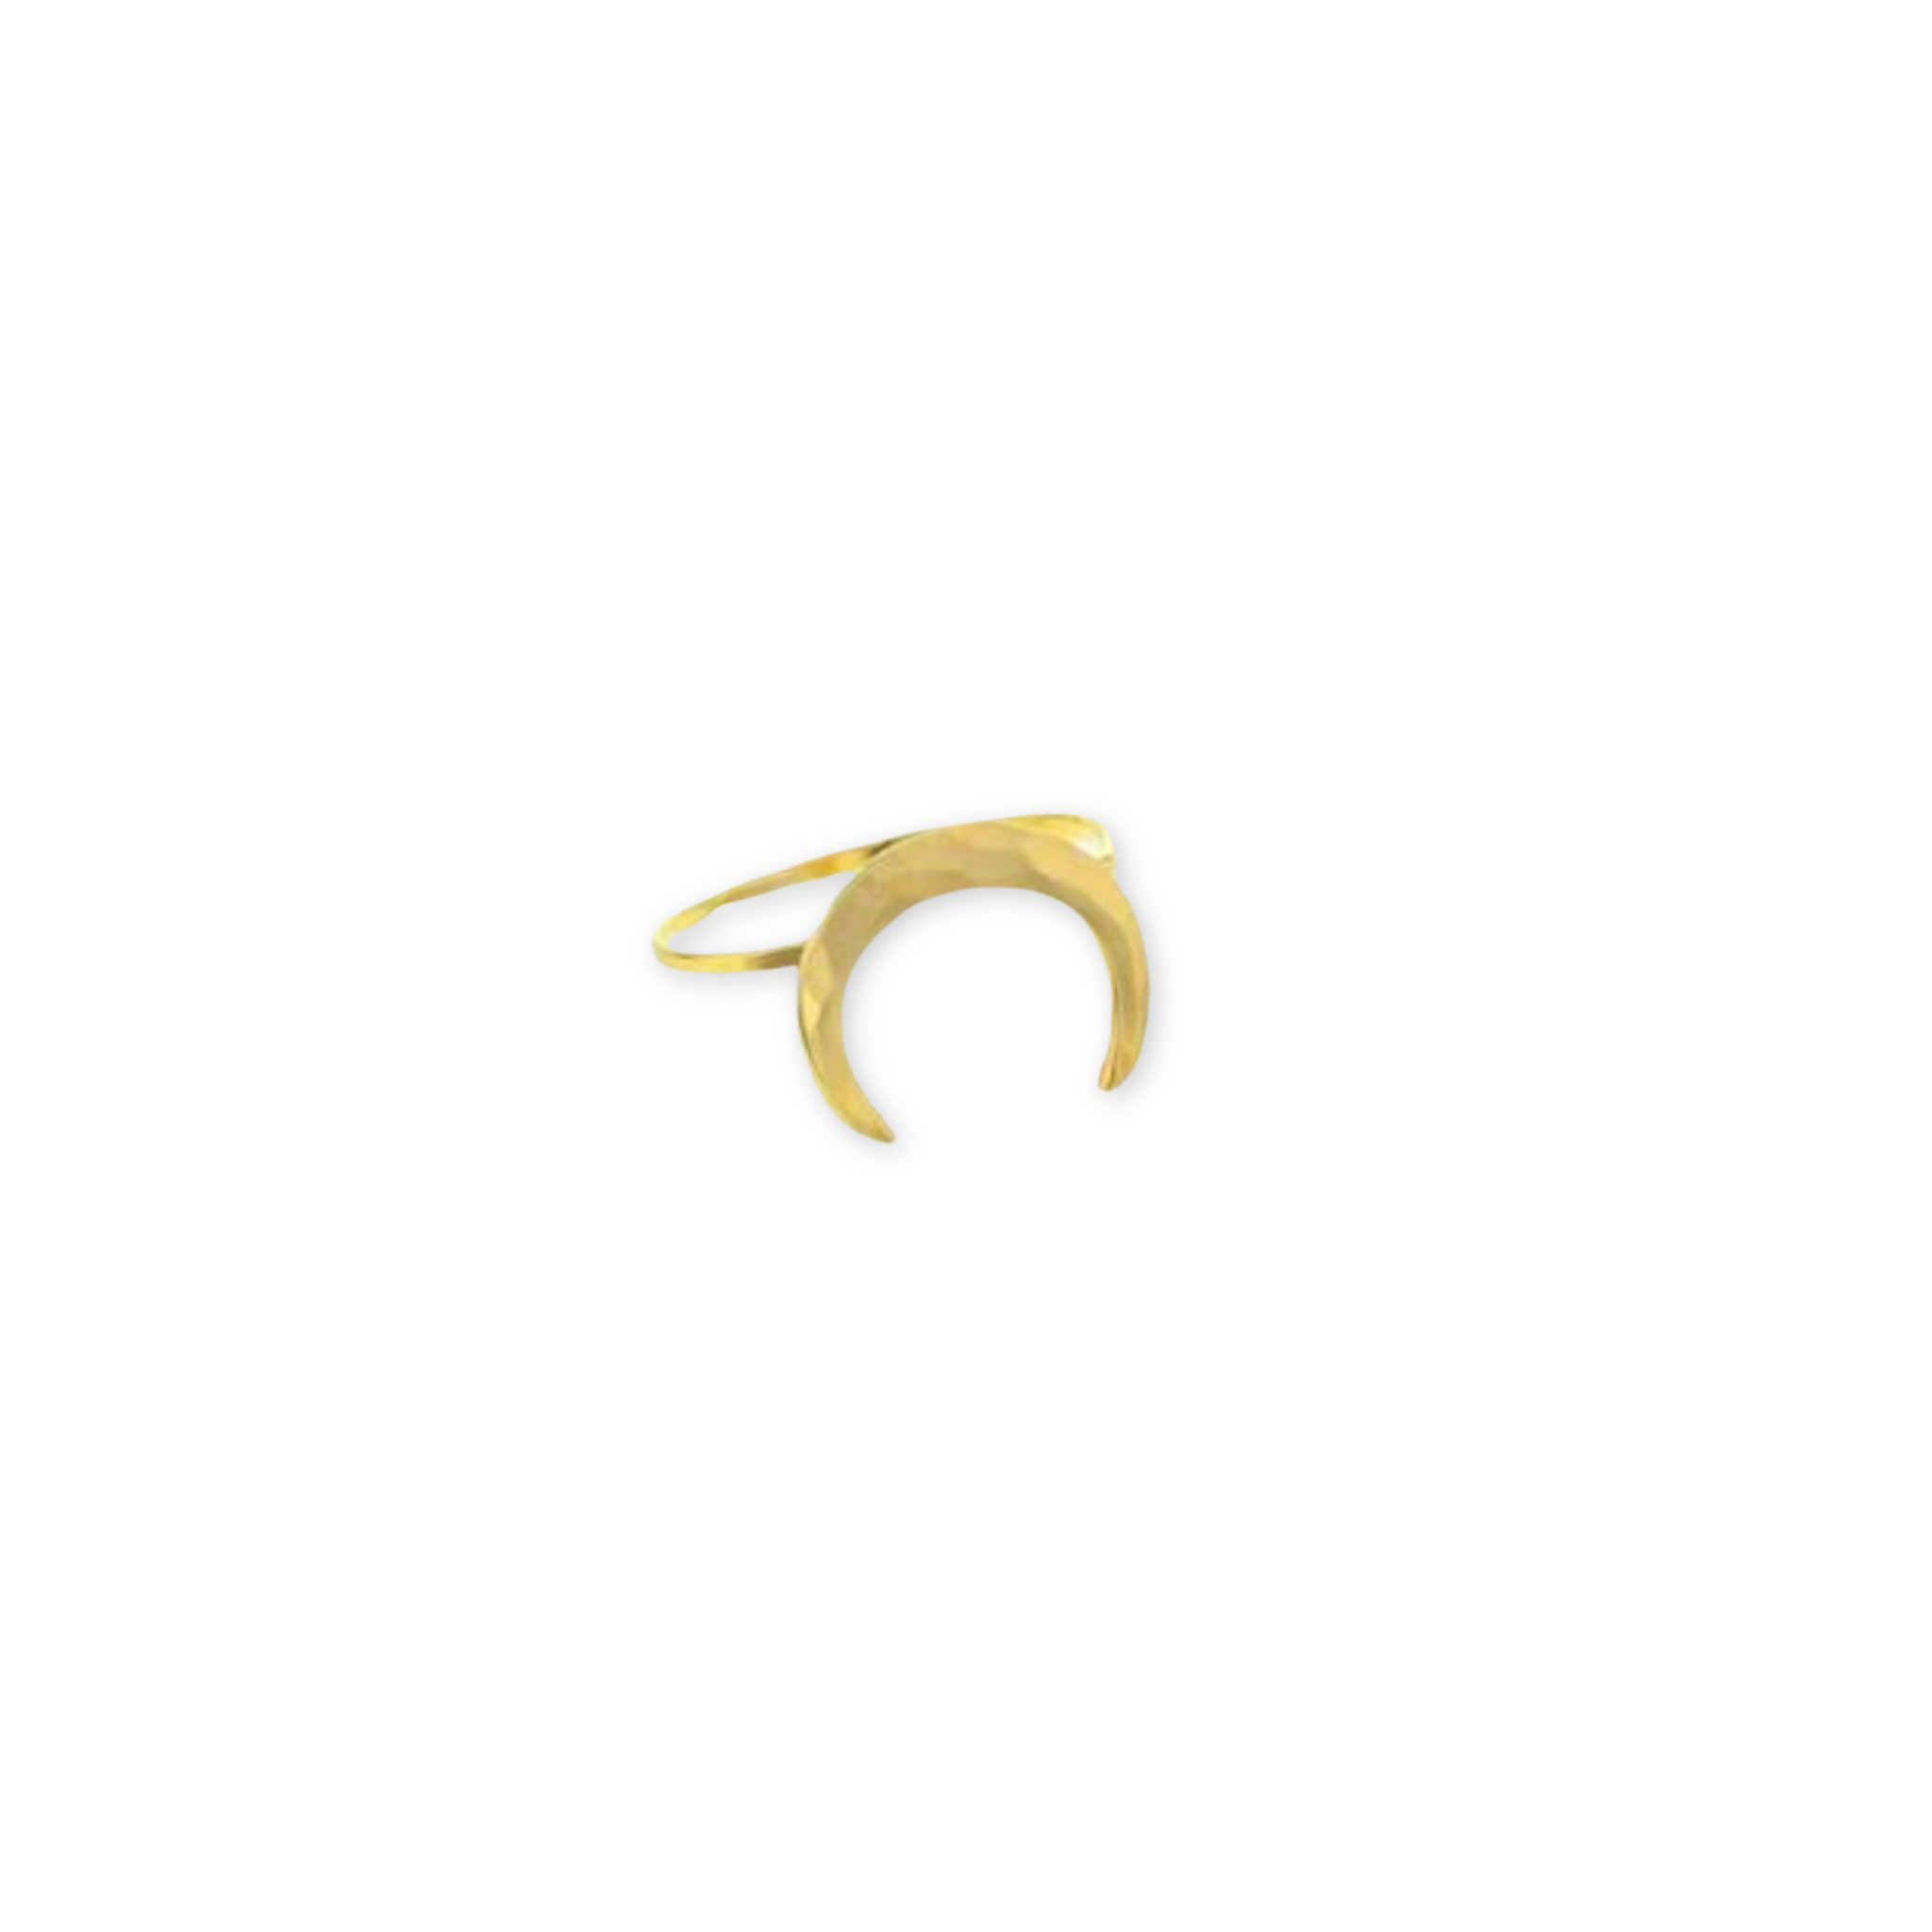 hammered ring band with a hammered crescent moon